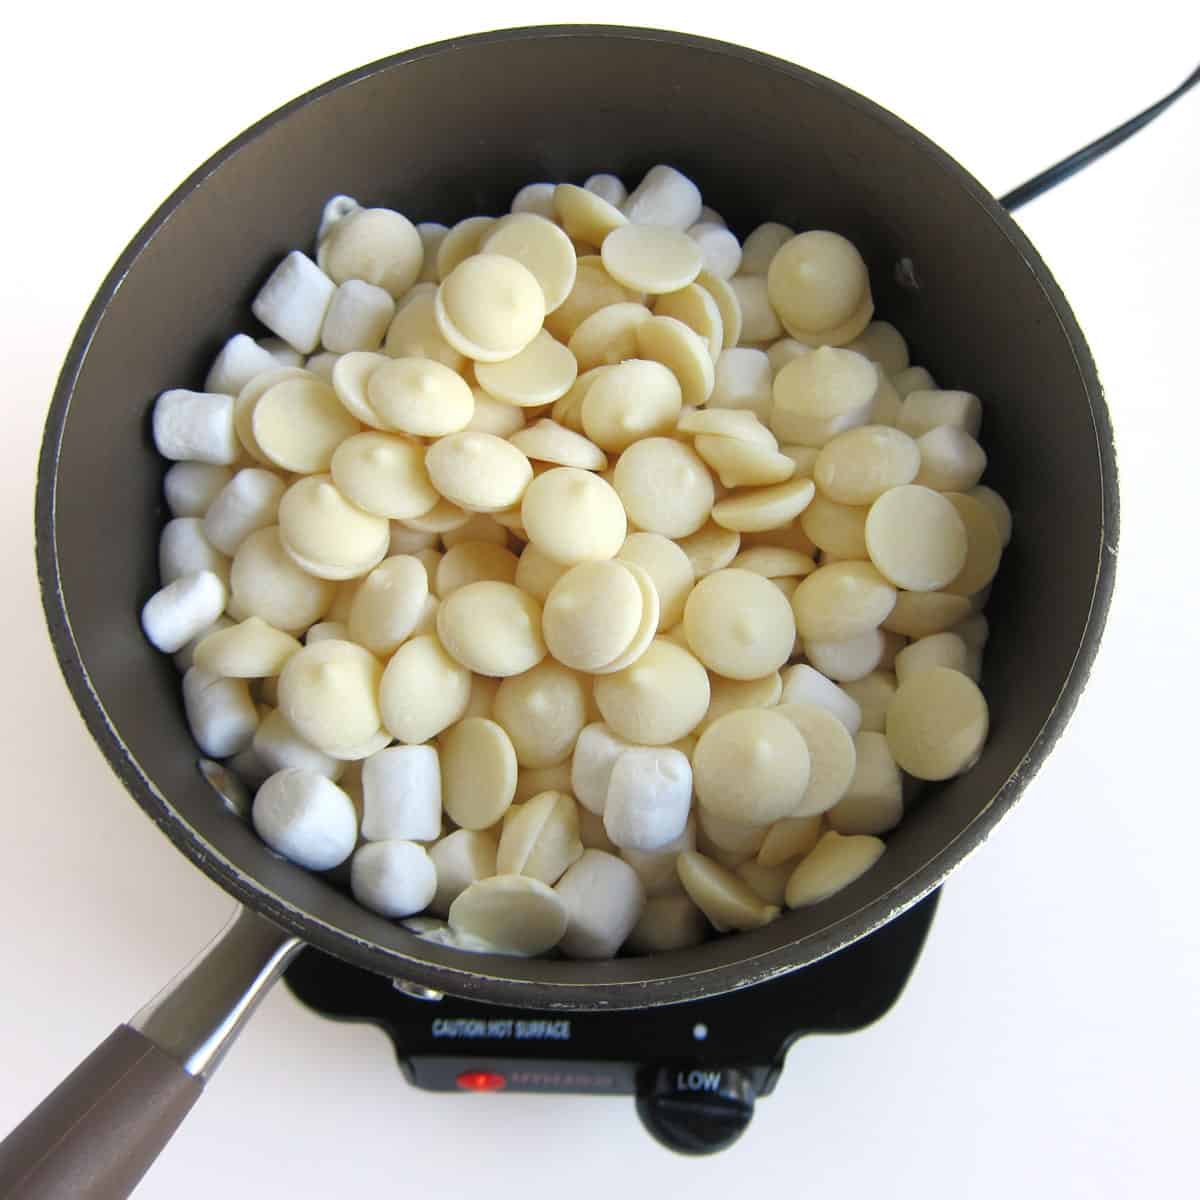 melting butter, marshmallows, and white candy melts in a saucepan.